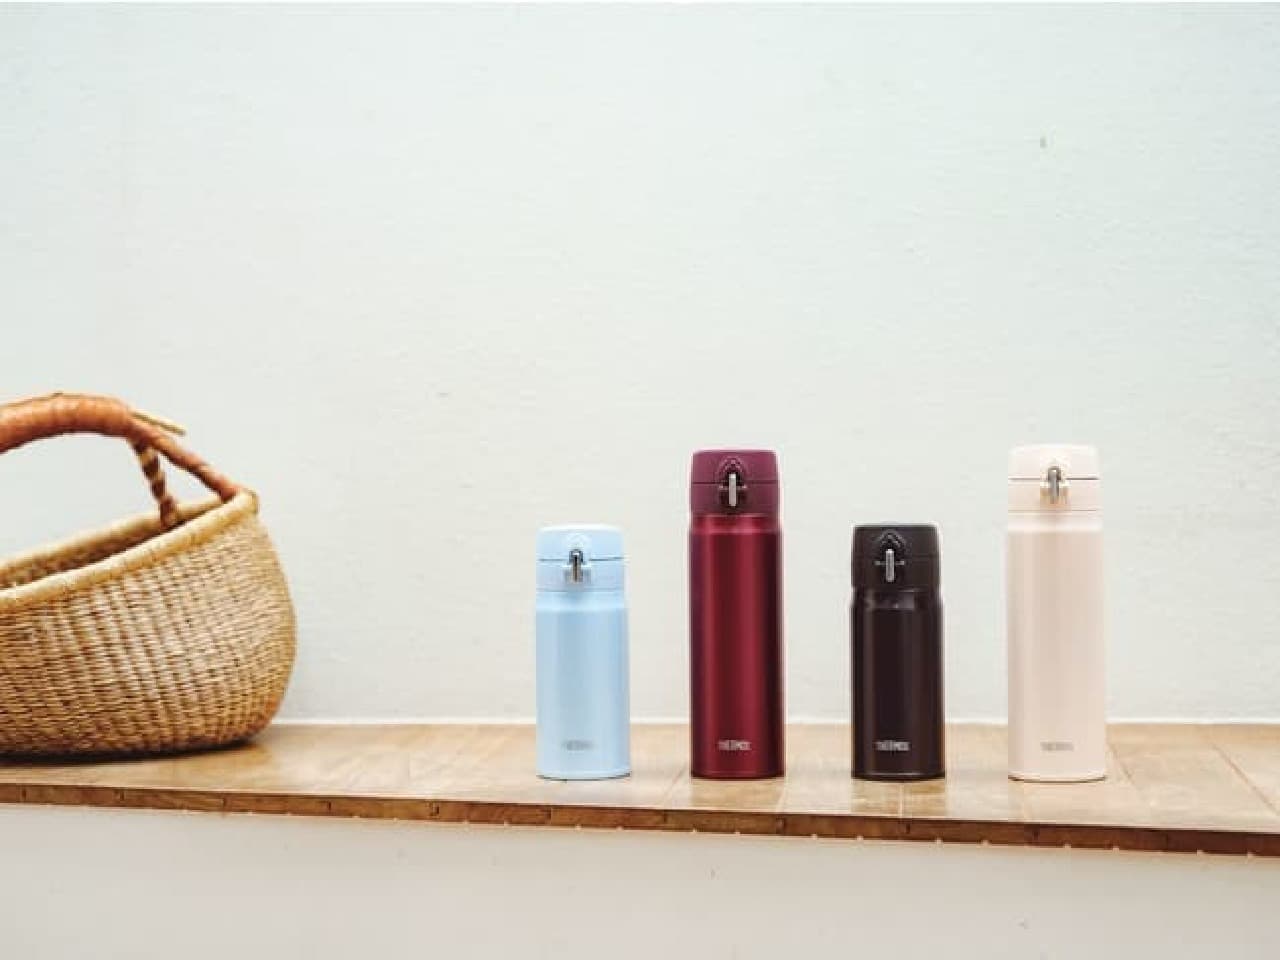 Released "Thermos Vacuum Insulated Mobile Mug (JOH-350 / 500)" --The lid that opens slowly with one touch is convenient.